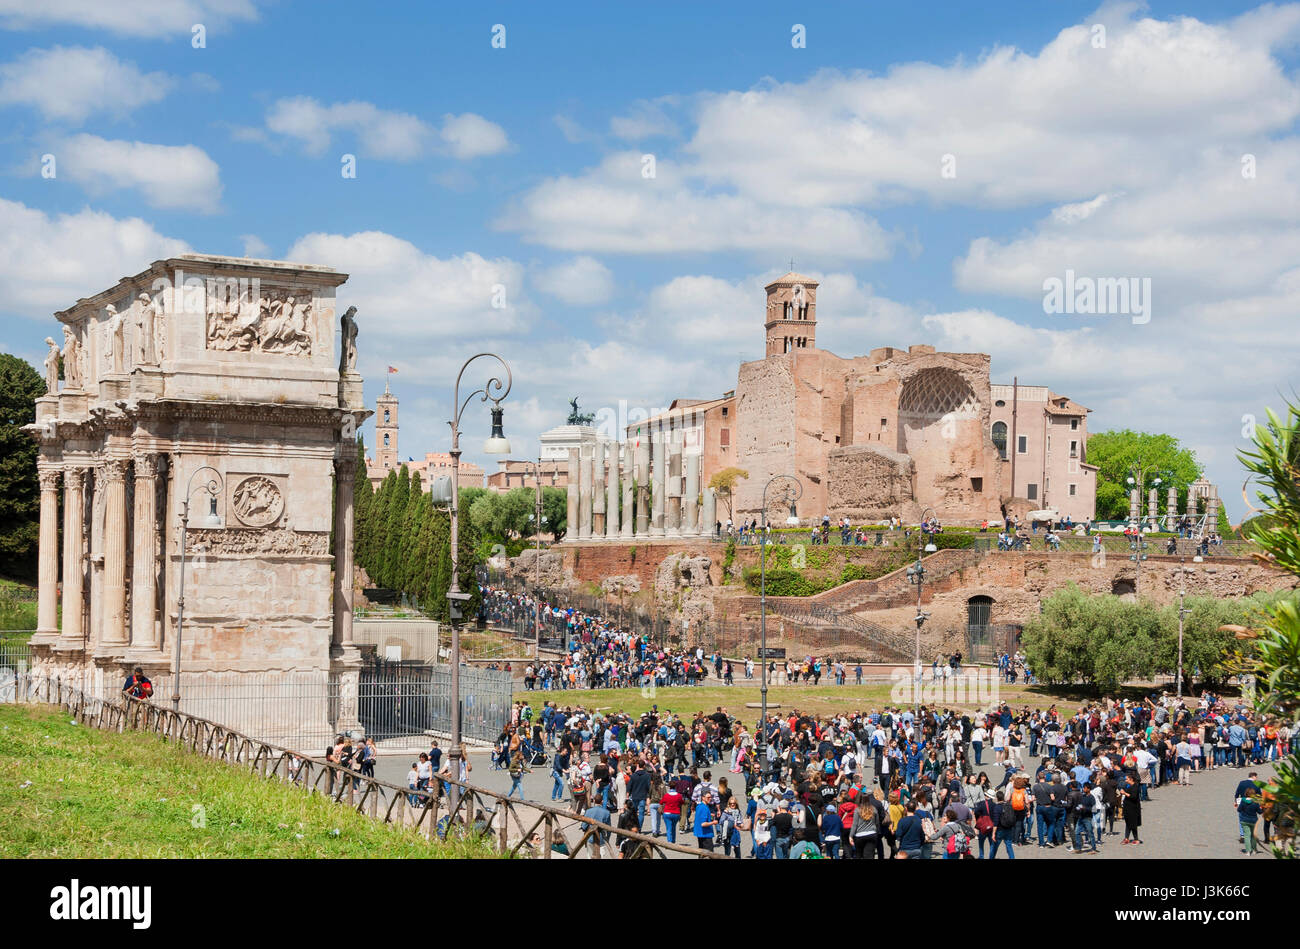 Tourists visit Rome central archaeological area with Arch of  Constantine and ancient Temple of Venus and Roma ruins Stock Photo